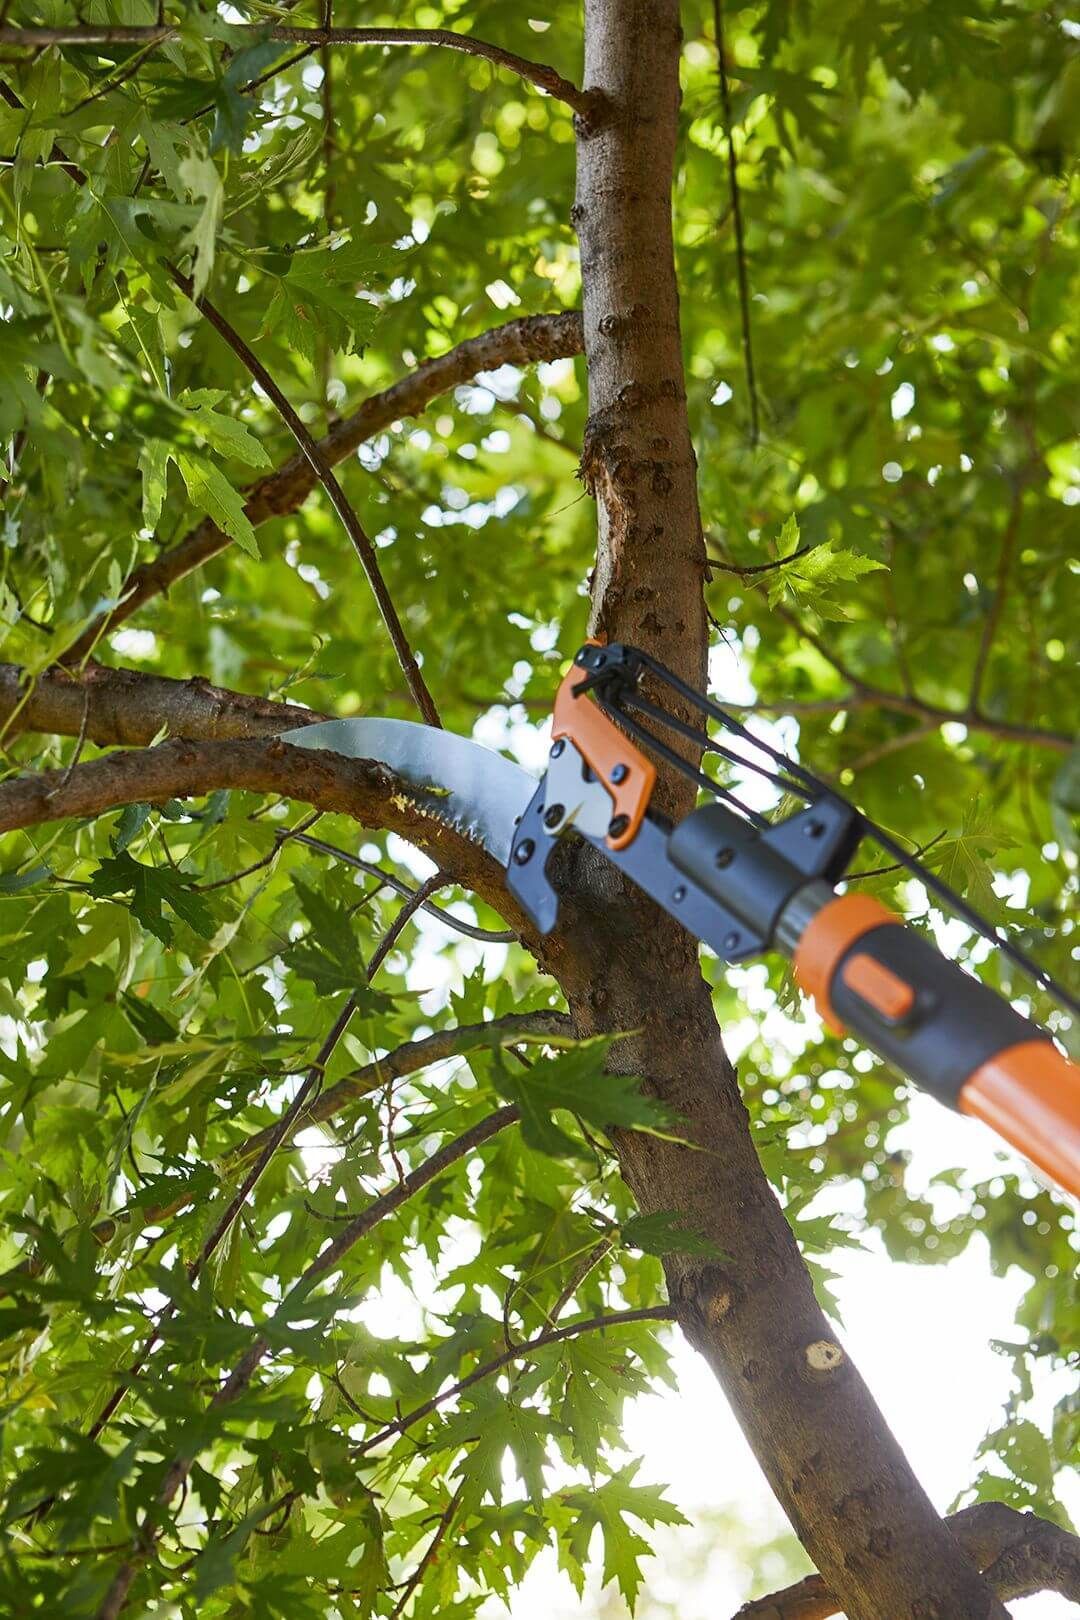 An image of a tree being trimmed and pruned in the Encinitas area.